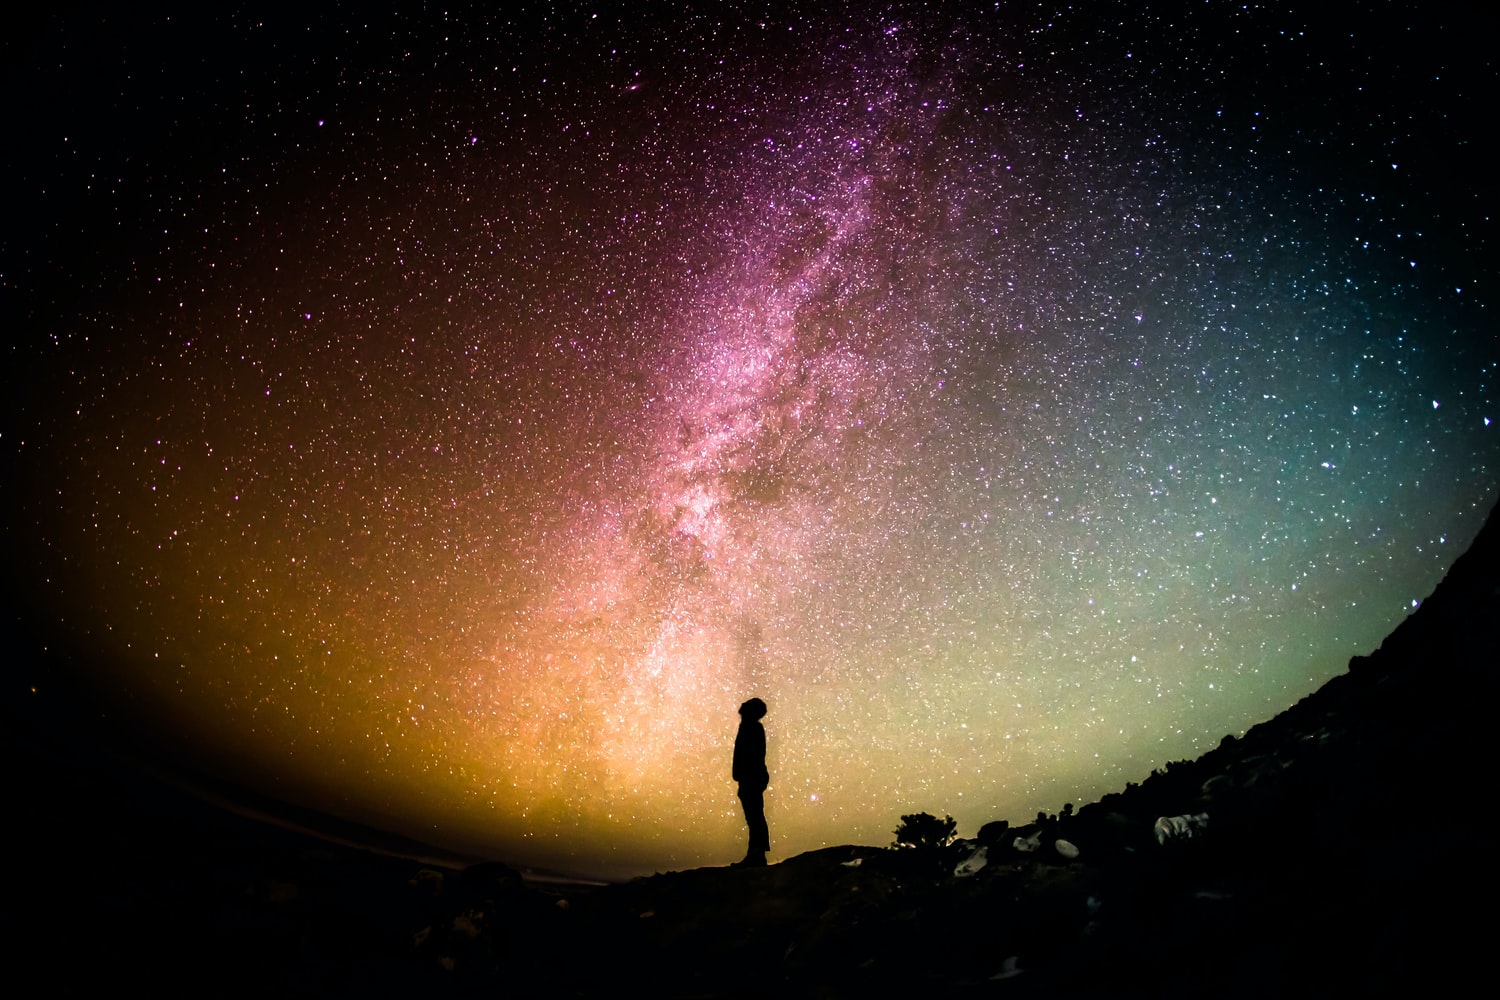 This is an image of a person looking up into the night sky.